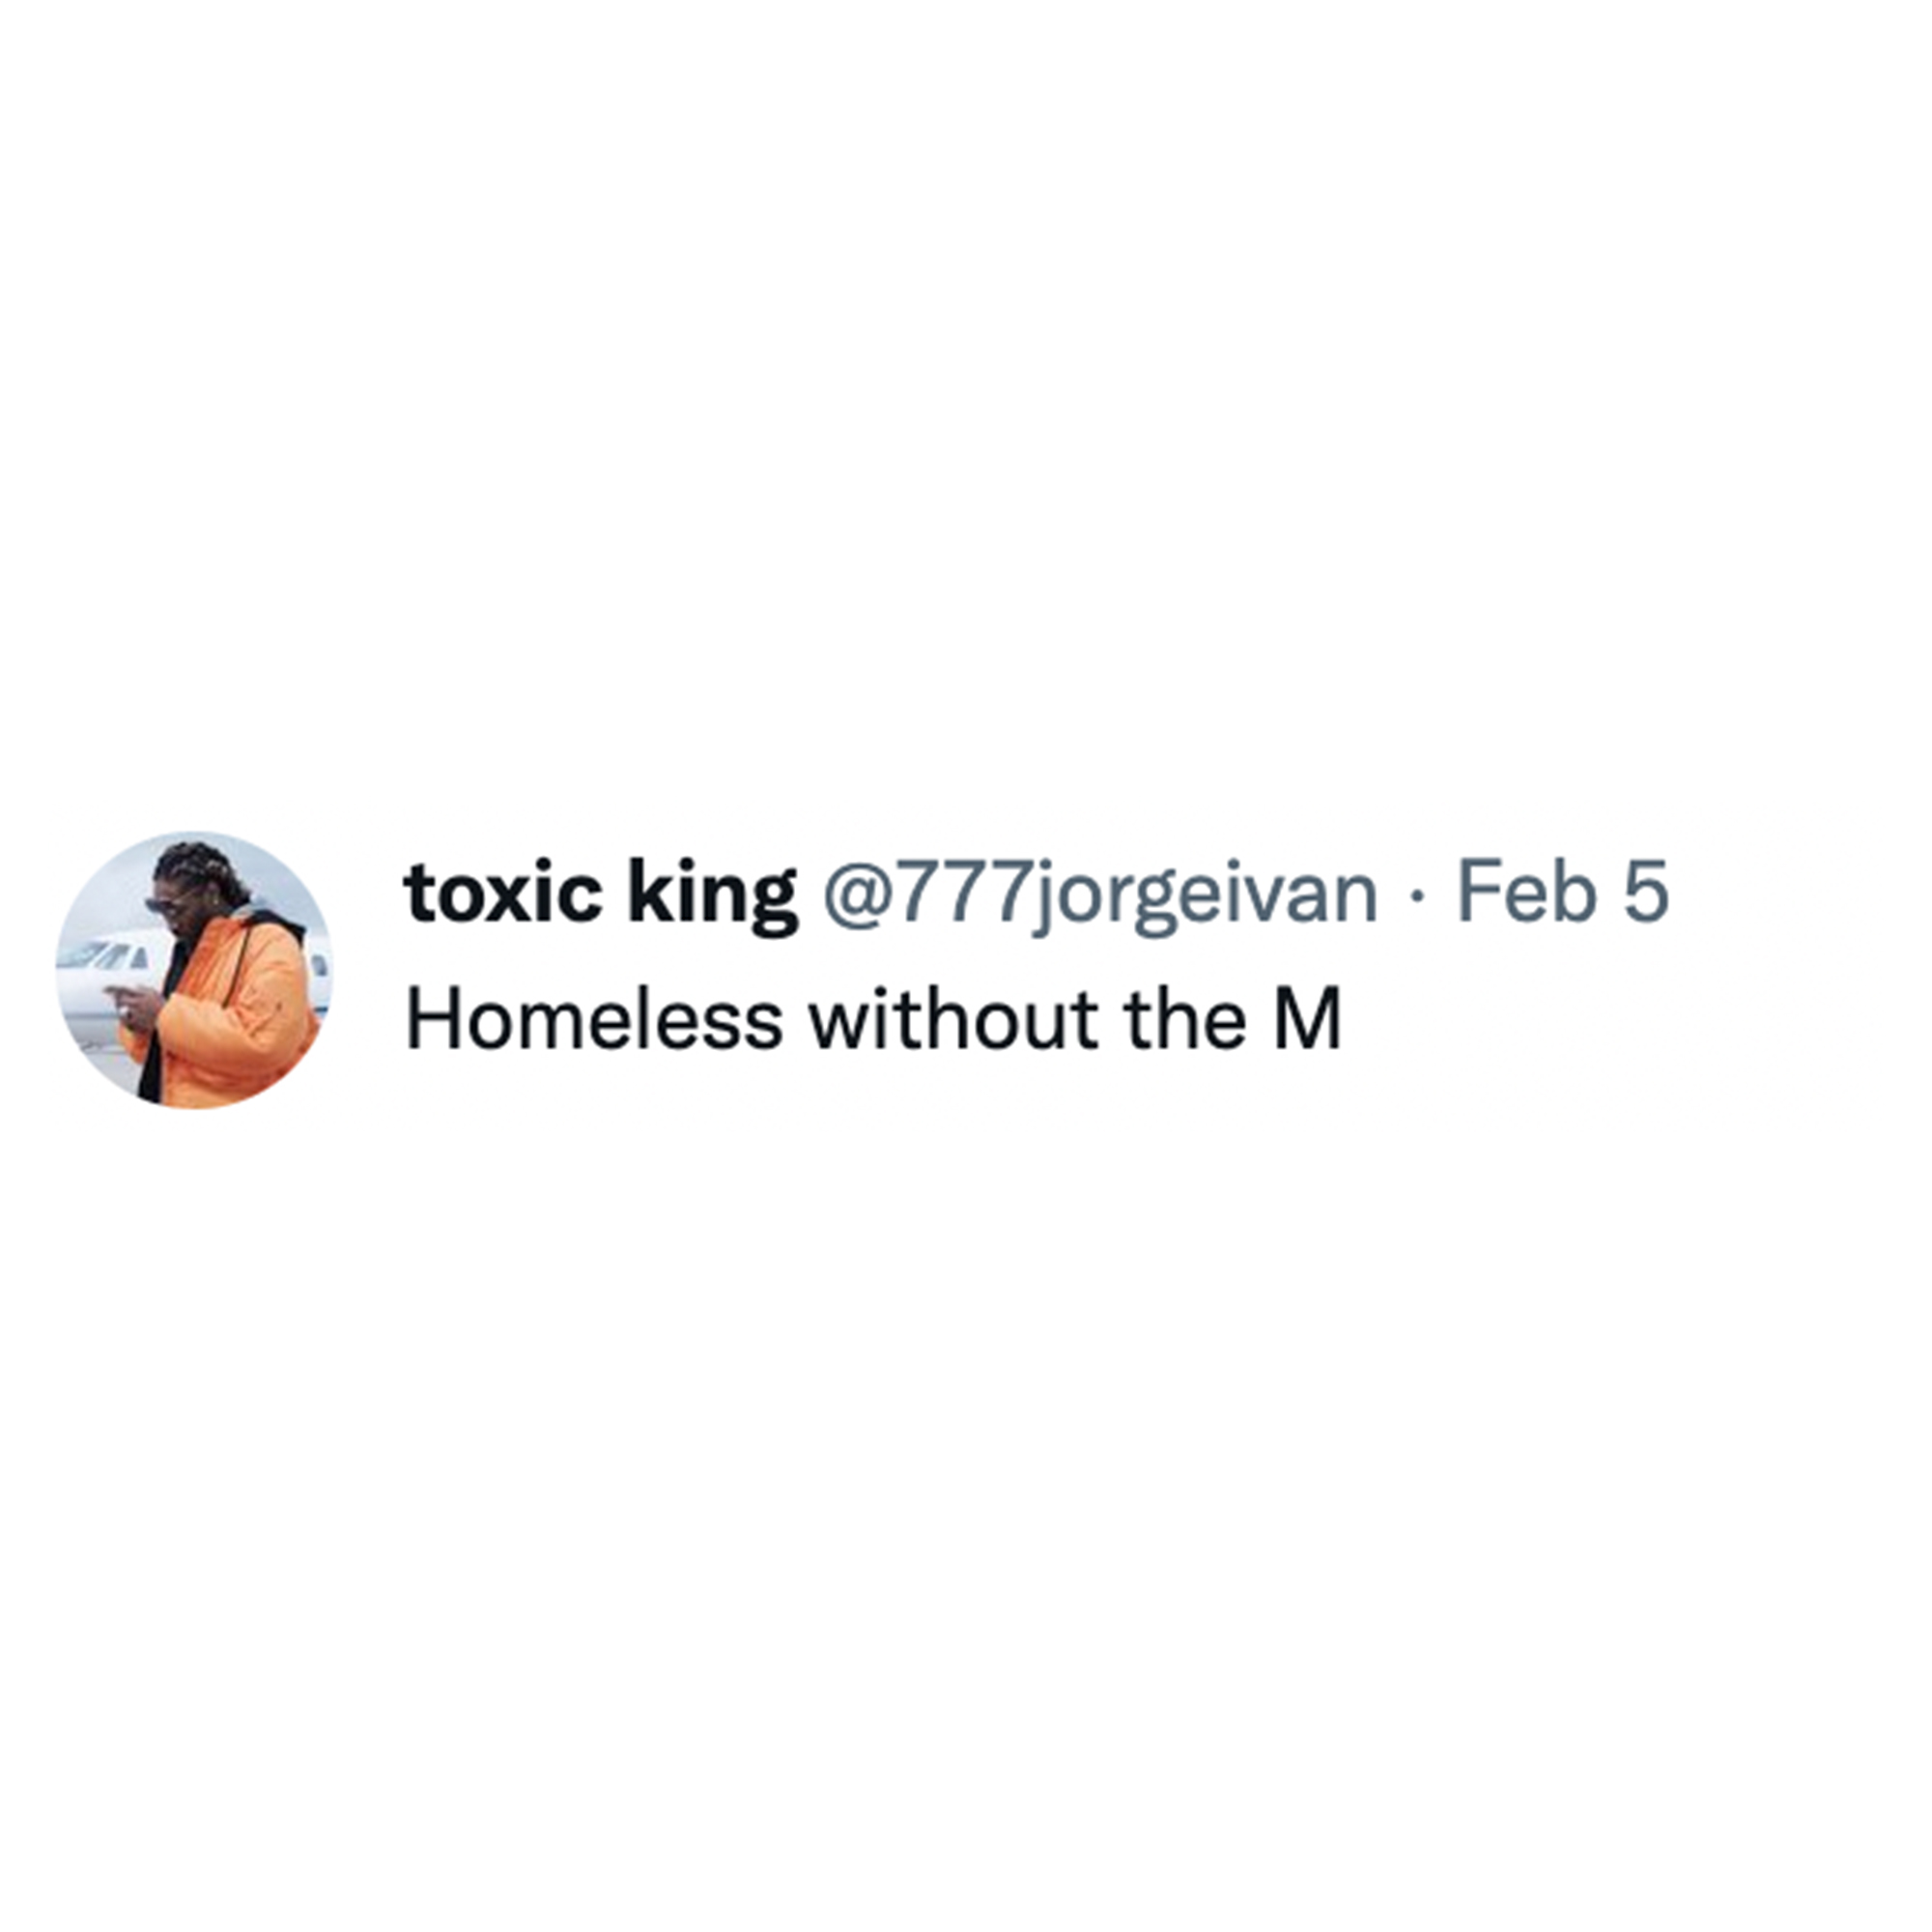 Toxic Memes and Tweets - northumbria healthcare - toxic king Feb 5 Homeless without the M